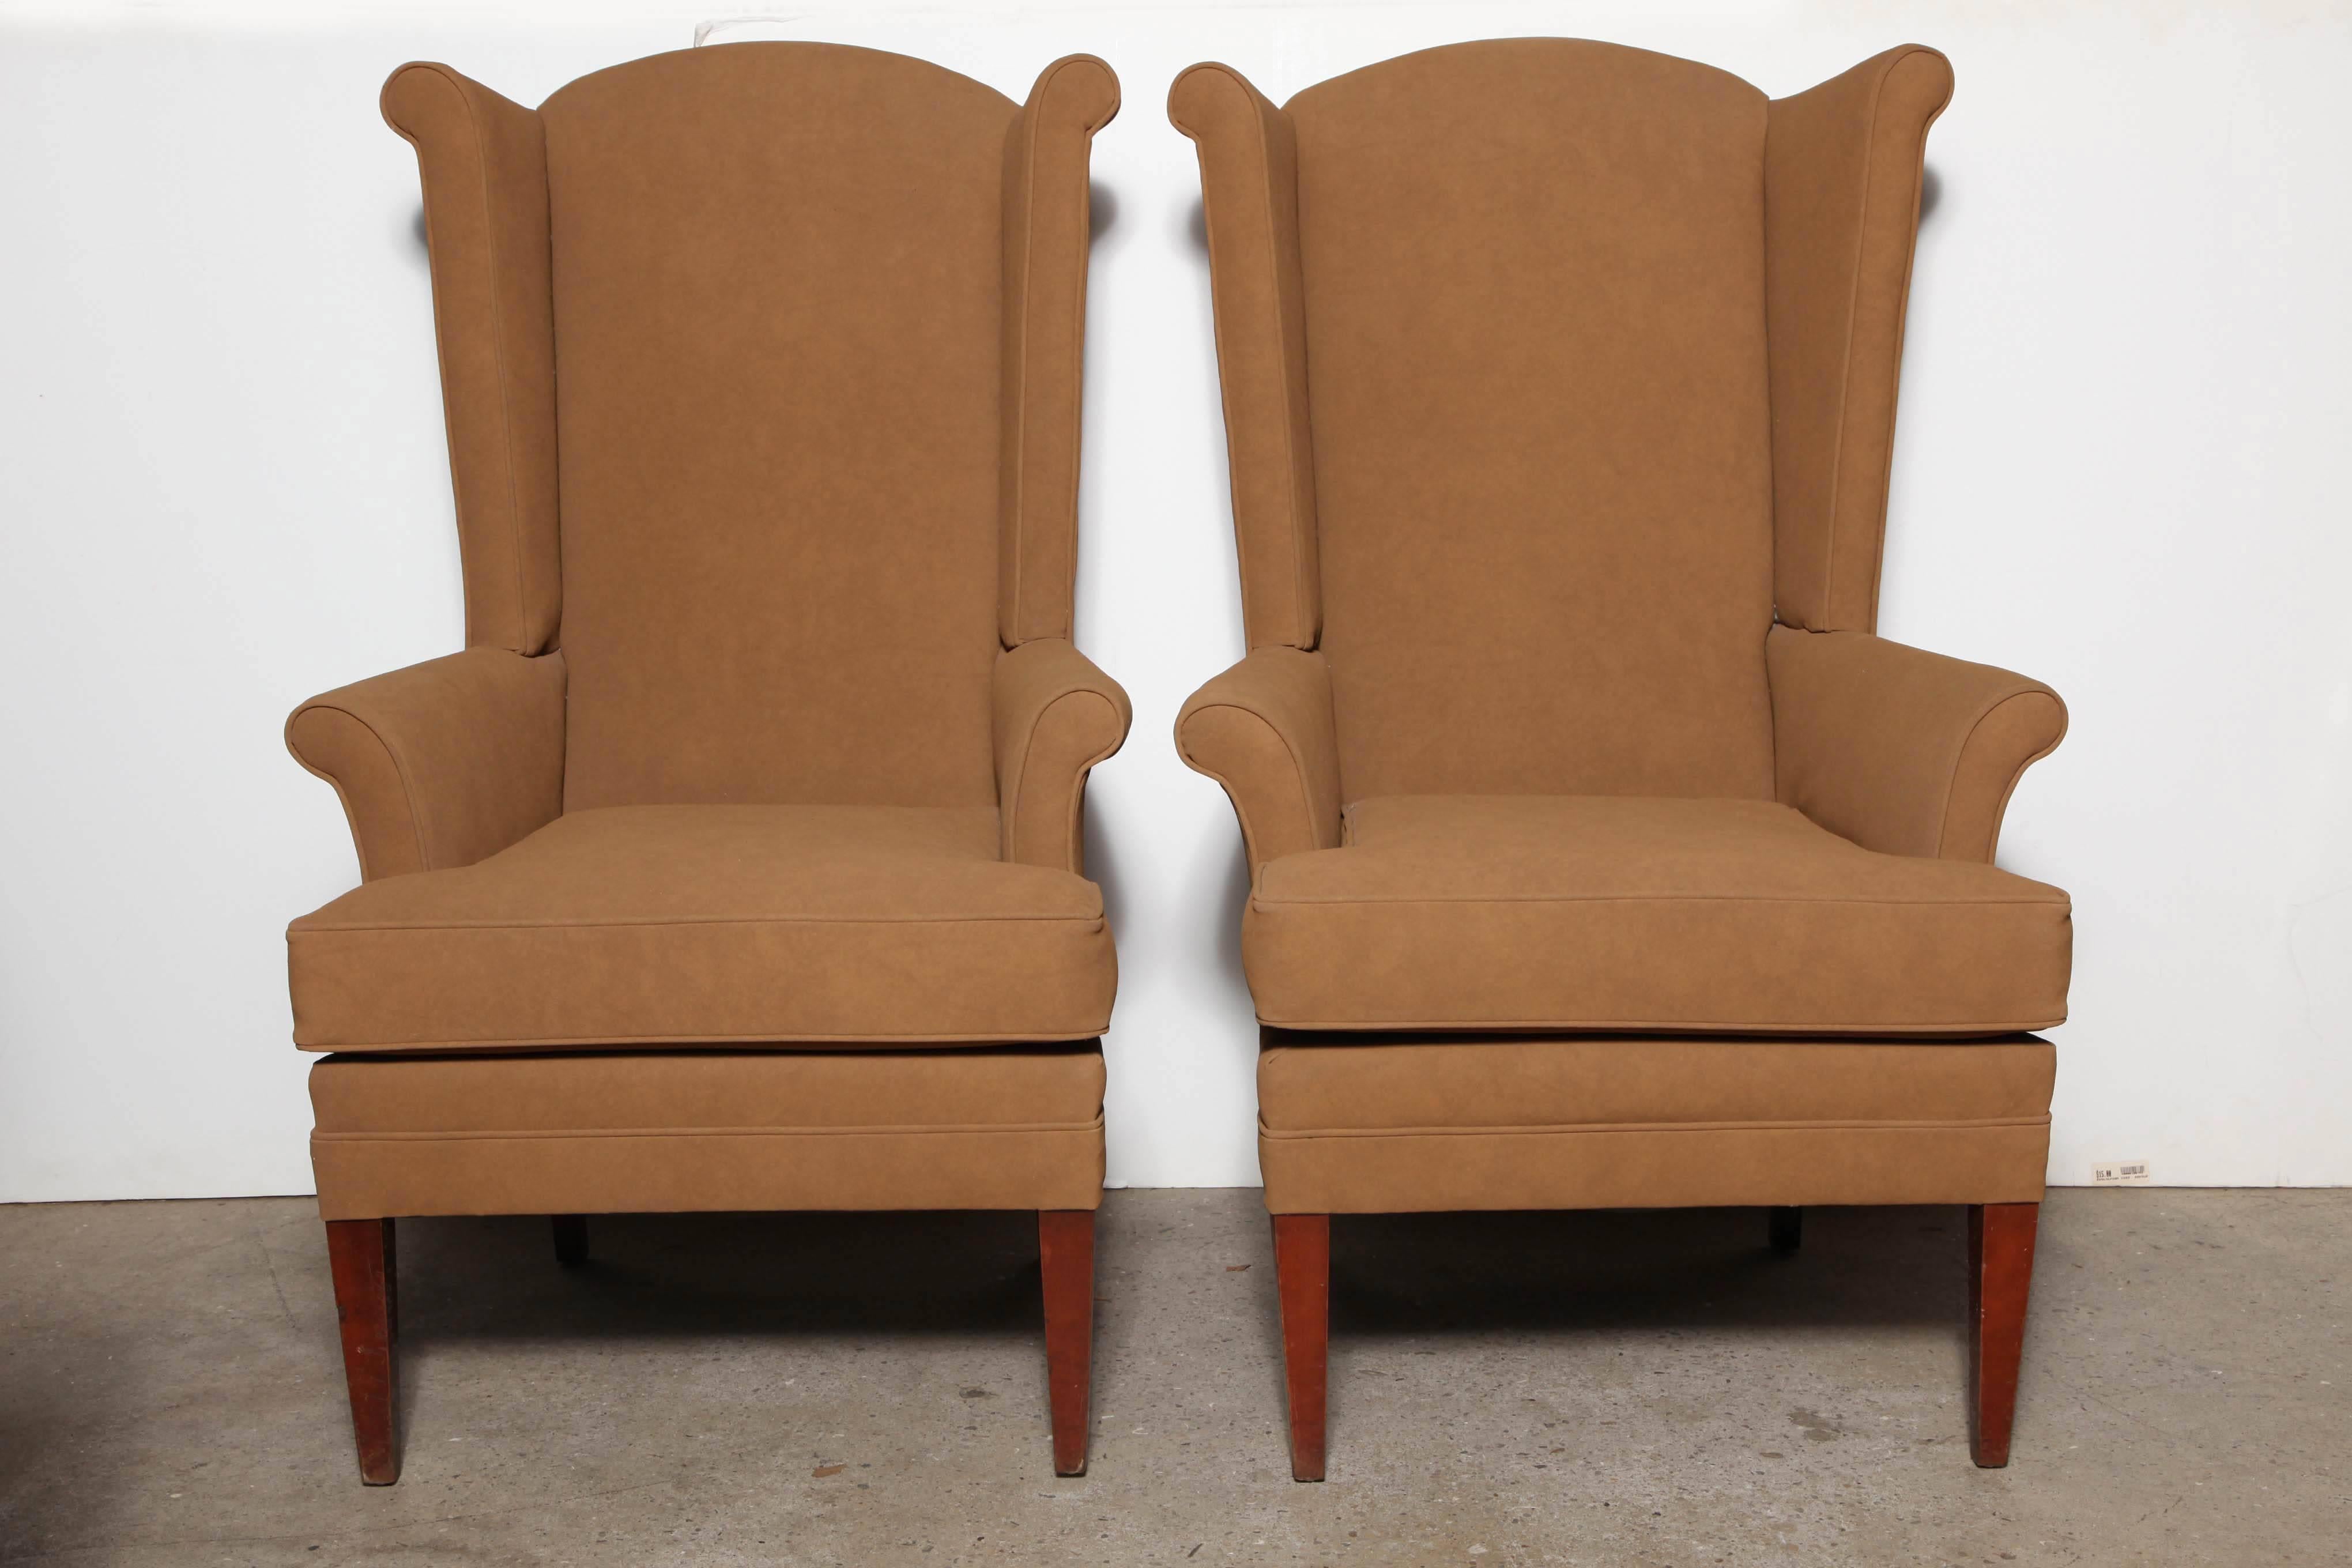 2 classic, MCM comfortable and solidly constructed High Back Wing Back Chairs. Upholstered in a clean and neutral, creamy Coffee or Camel ultra-suede, supported by four Walnut legs.  Great as Host and Hostess Dining Room 
Arm Chairs, Den Chairs,